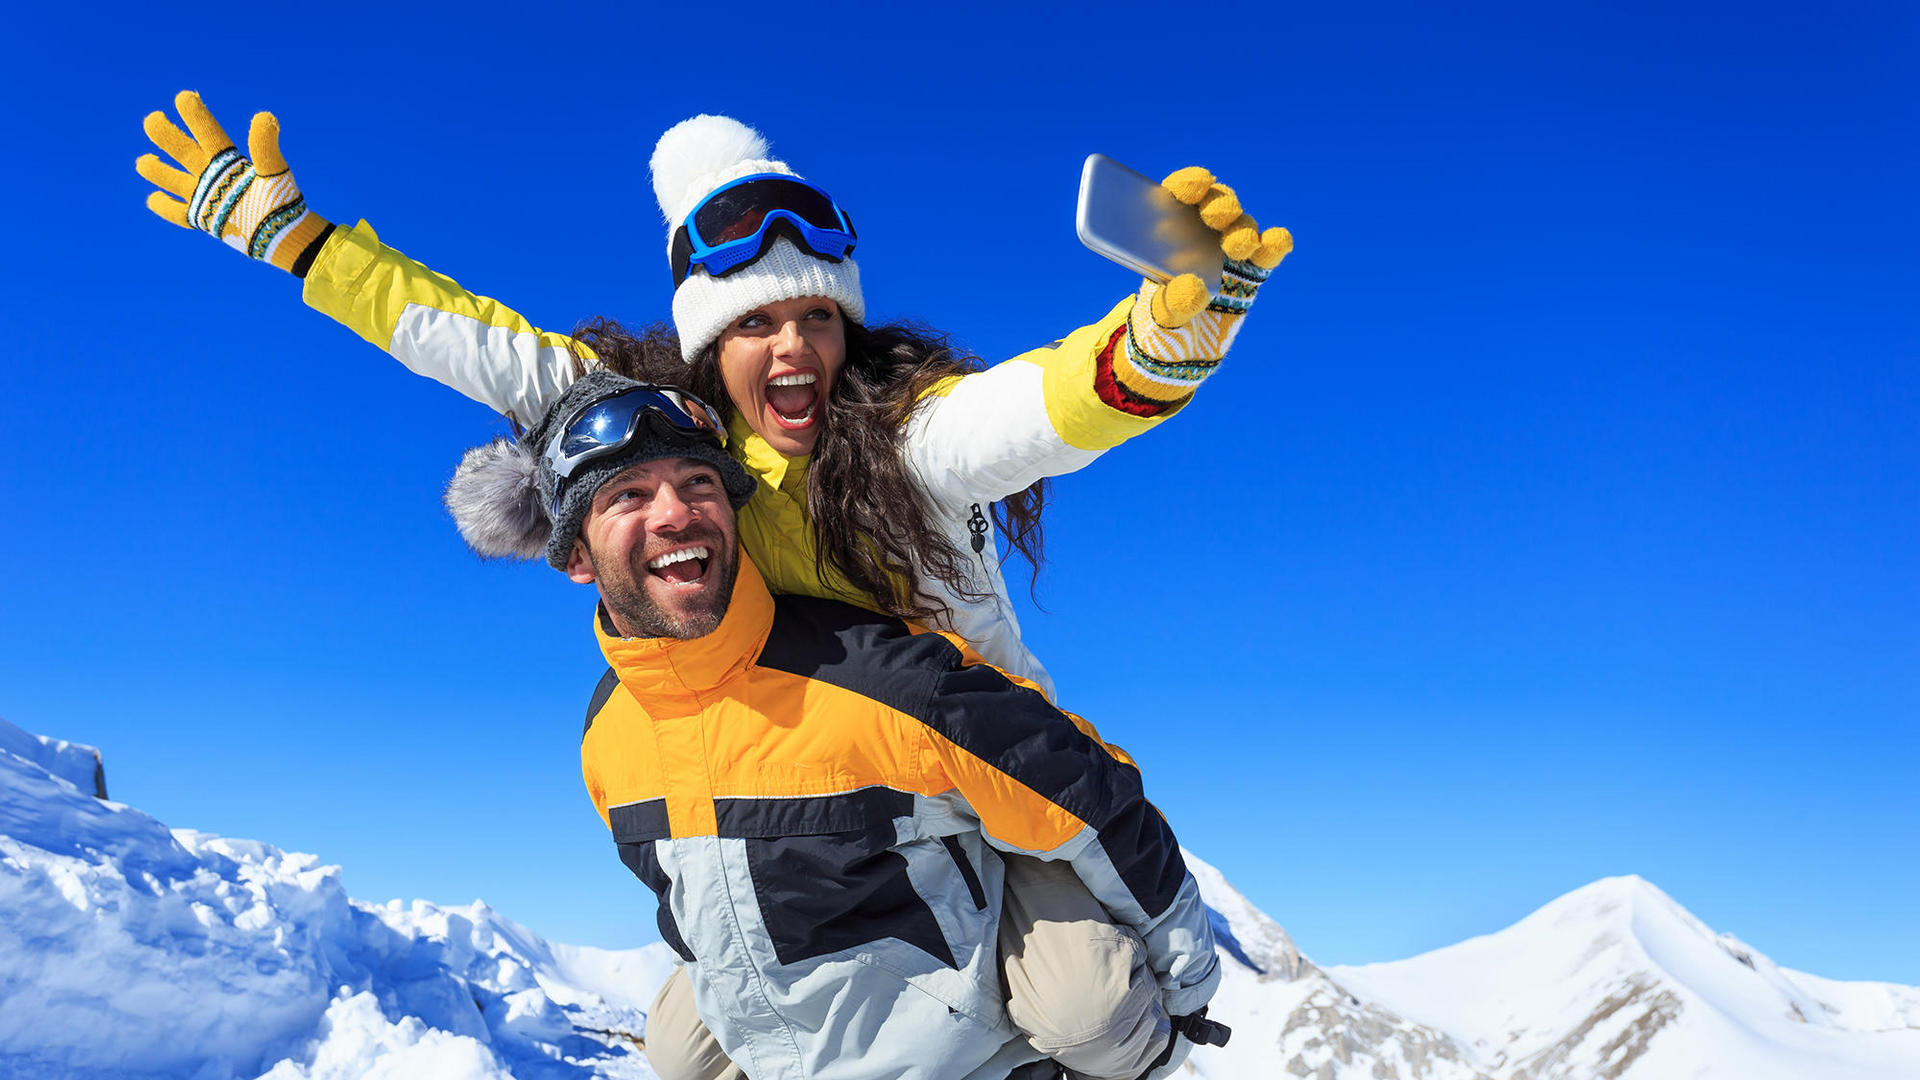 Man and woman taking selfie on top of snowy mountain